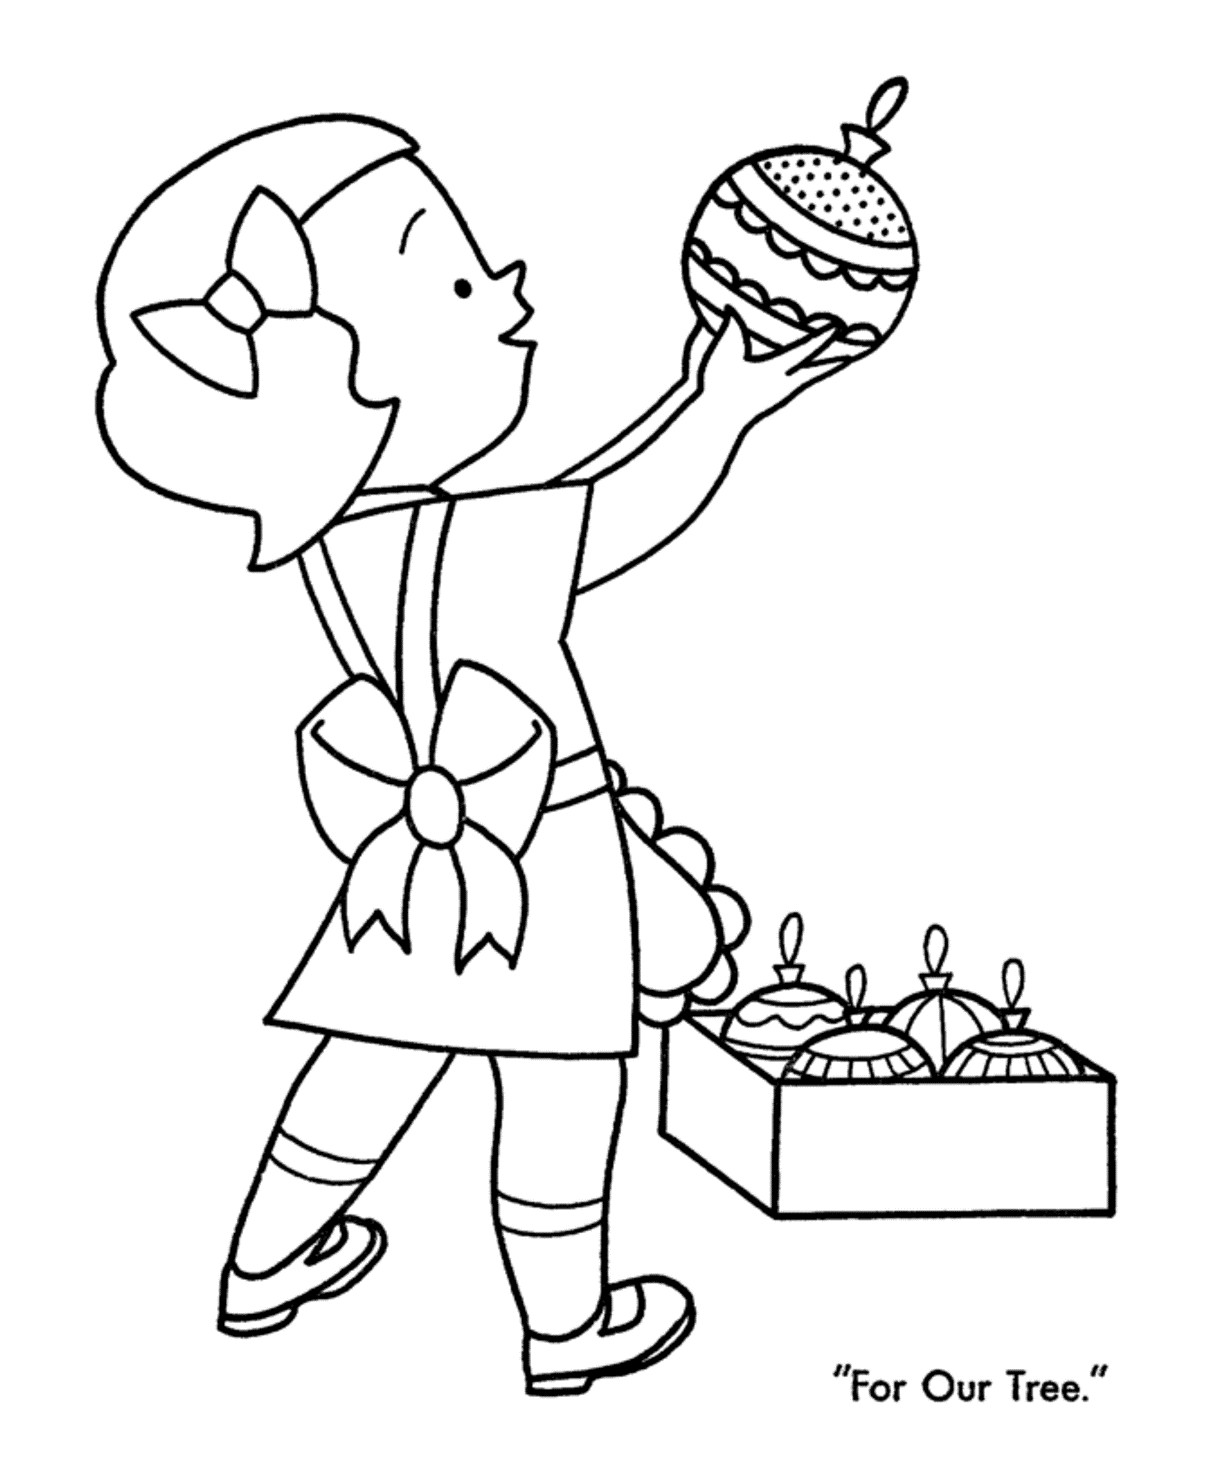 Girl Christmas Coloring Pages
 Little Girl With Ornaments For Christmas Coloring Page